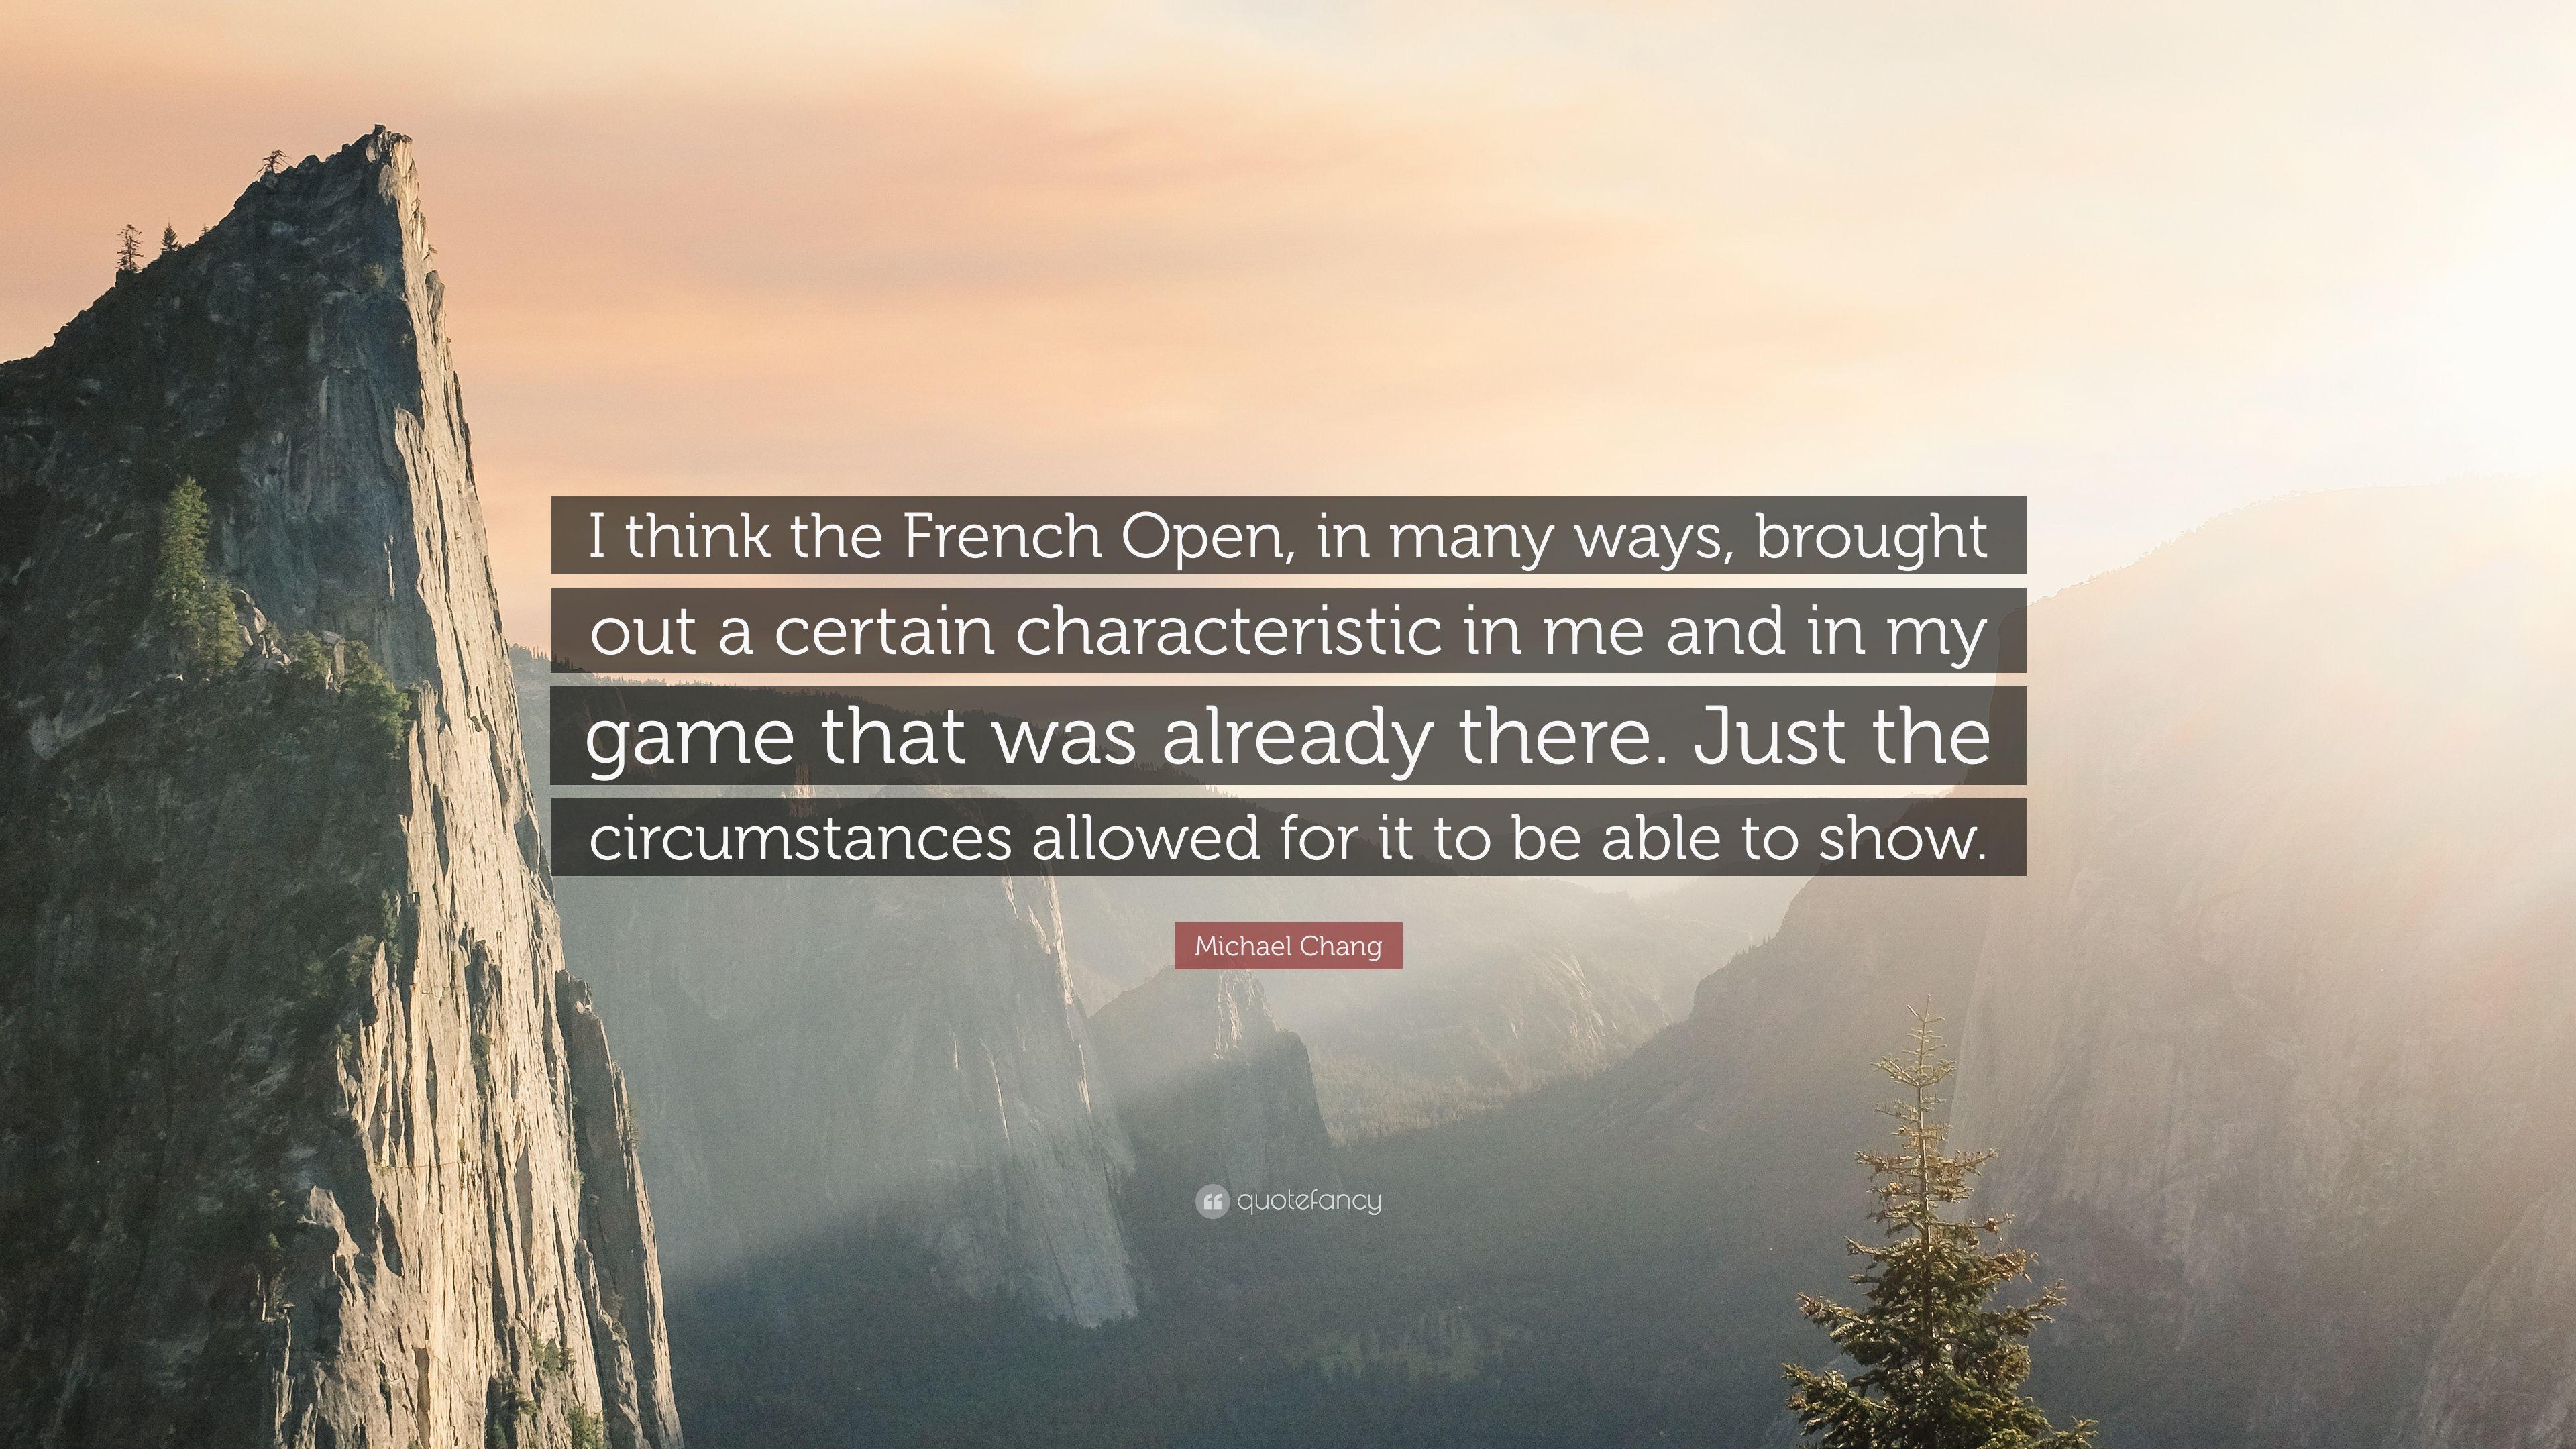 Michael Chang Quote: “I think the French Open, in many ways, brought